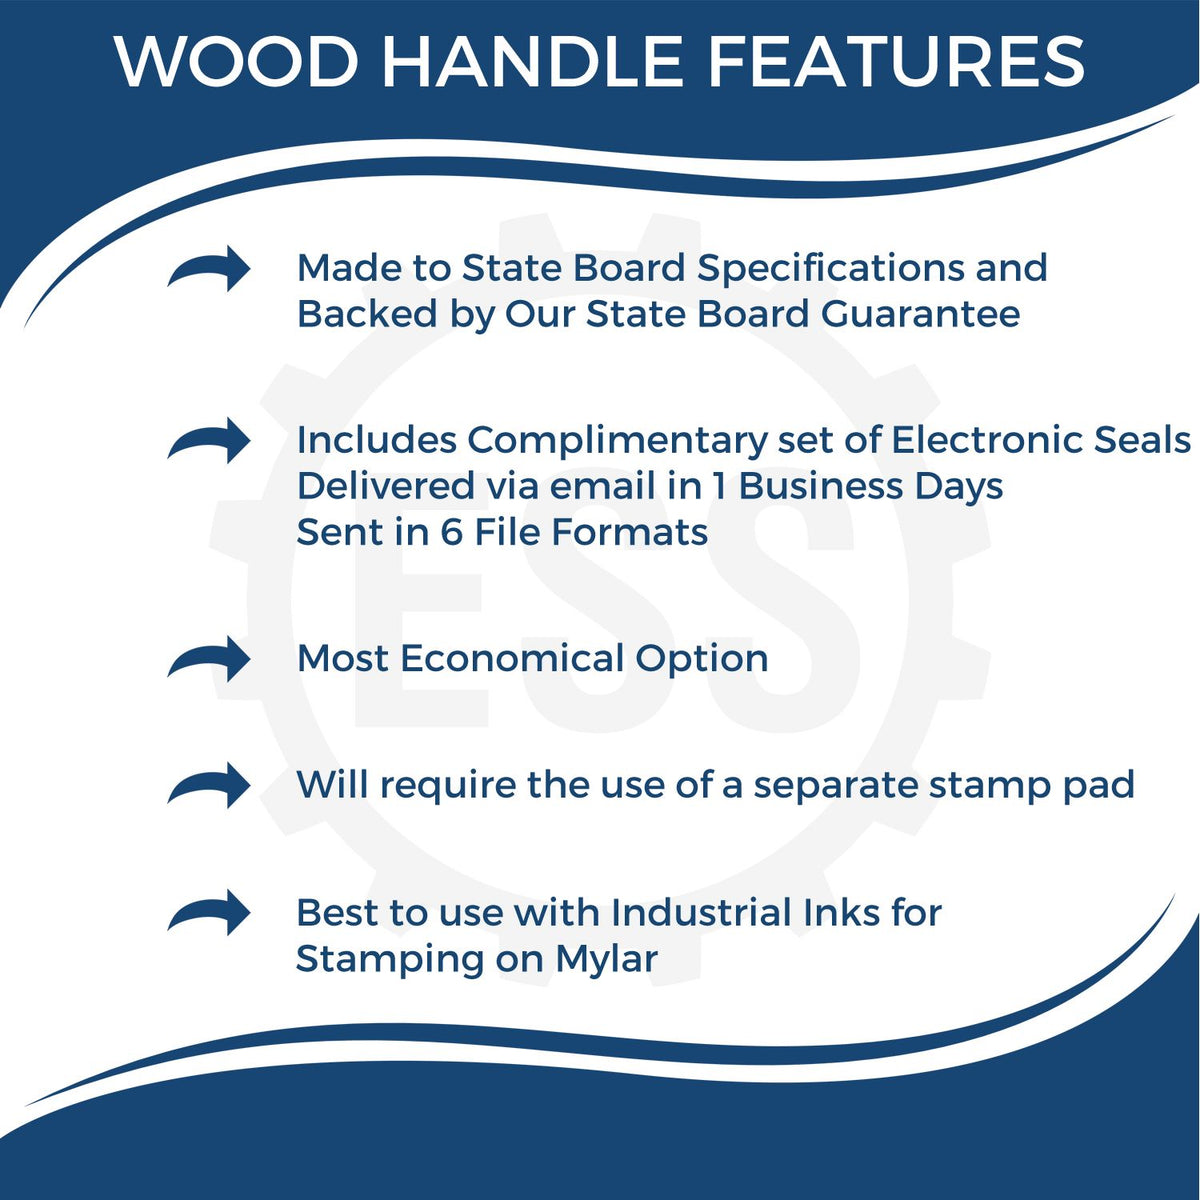 A picture of an infographic highlighting the selling points for the Wooden Handle North Dakota Rectangular Notary Public Stamp